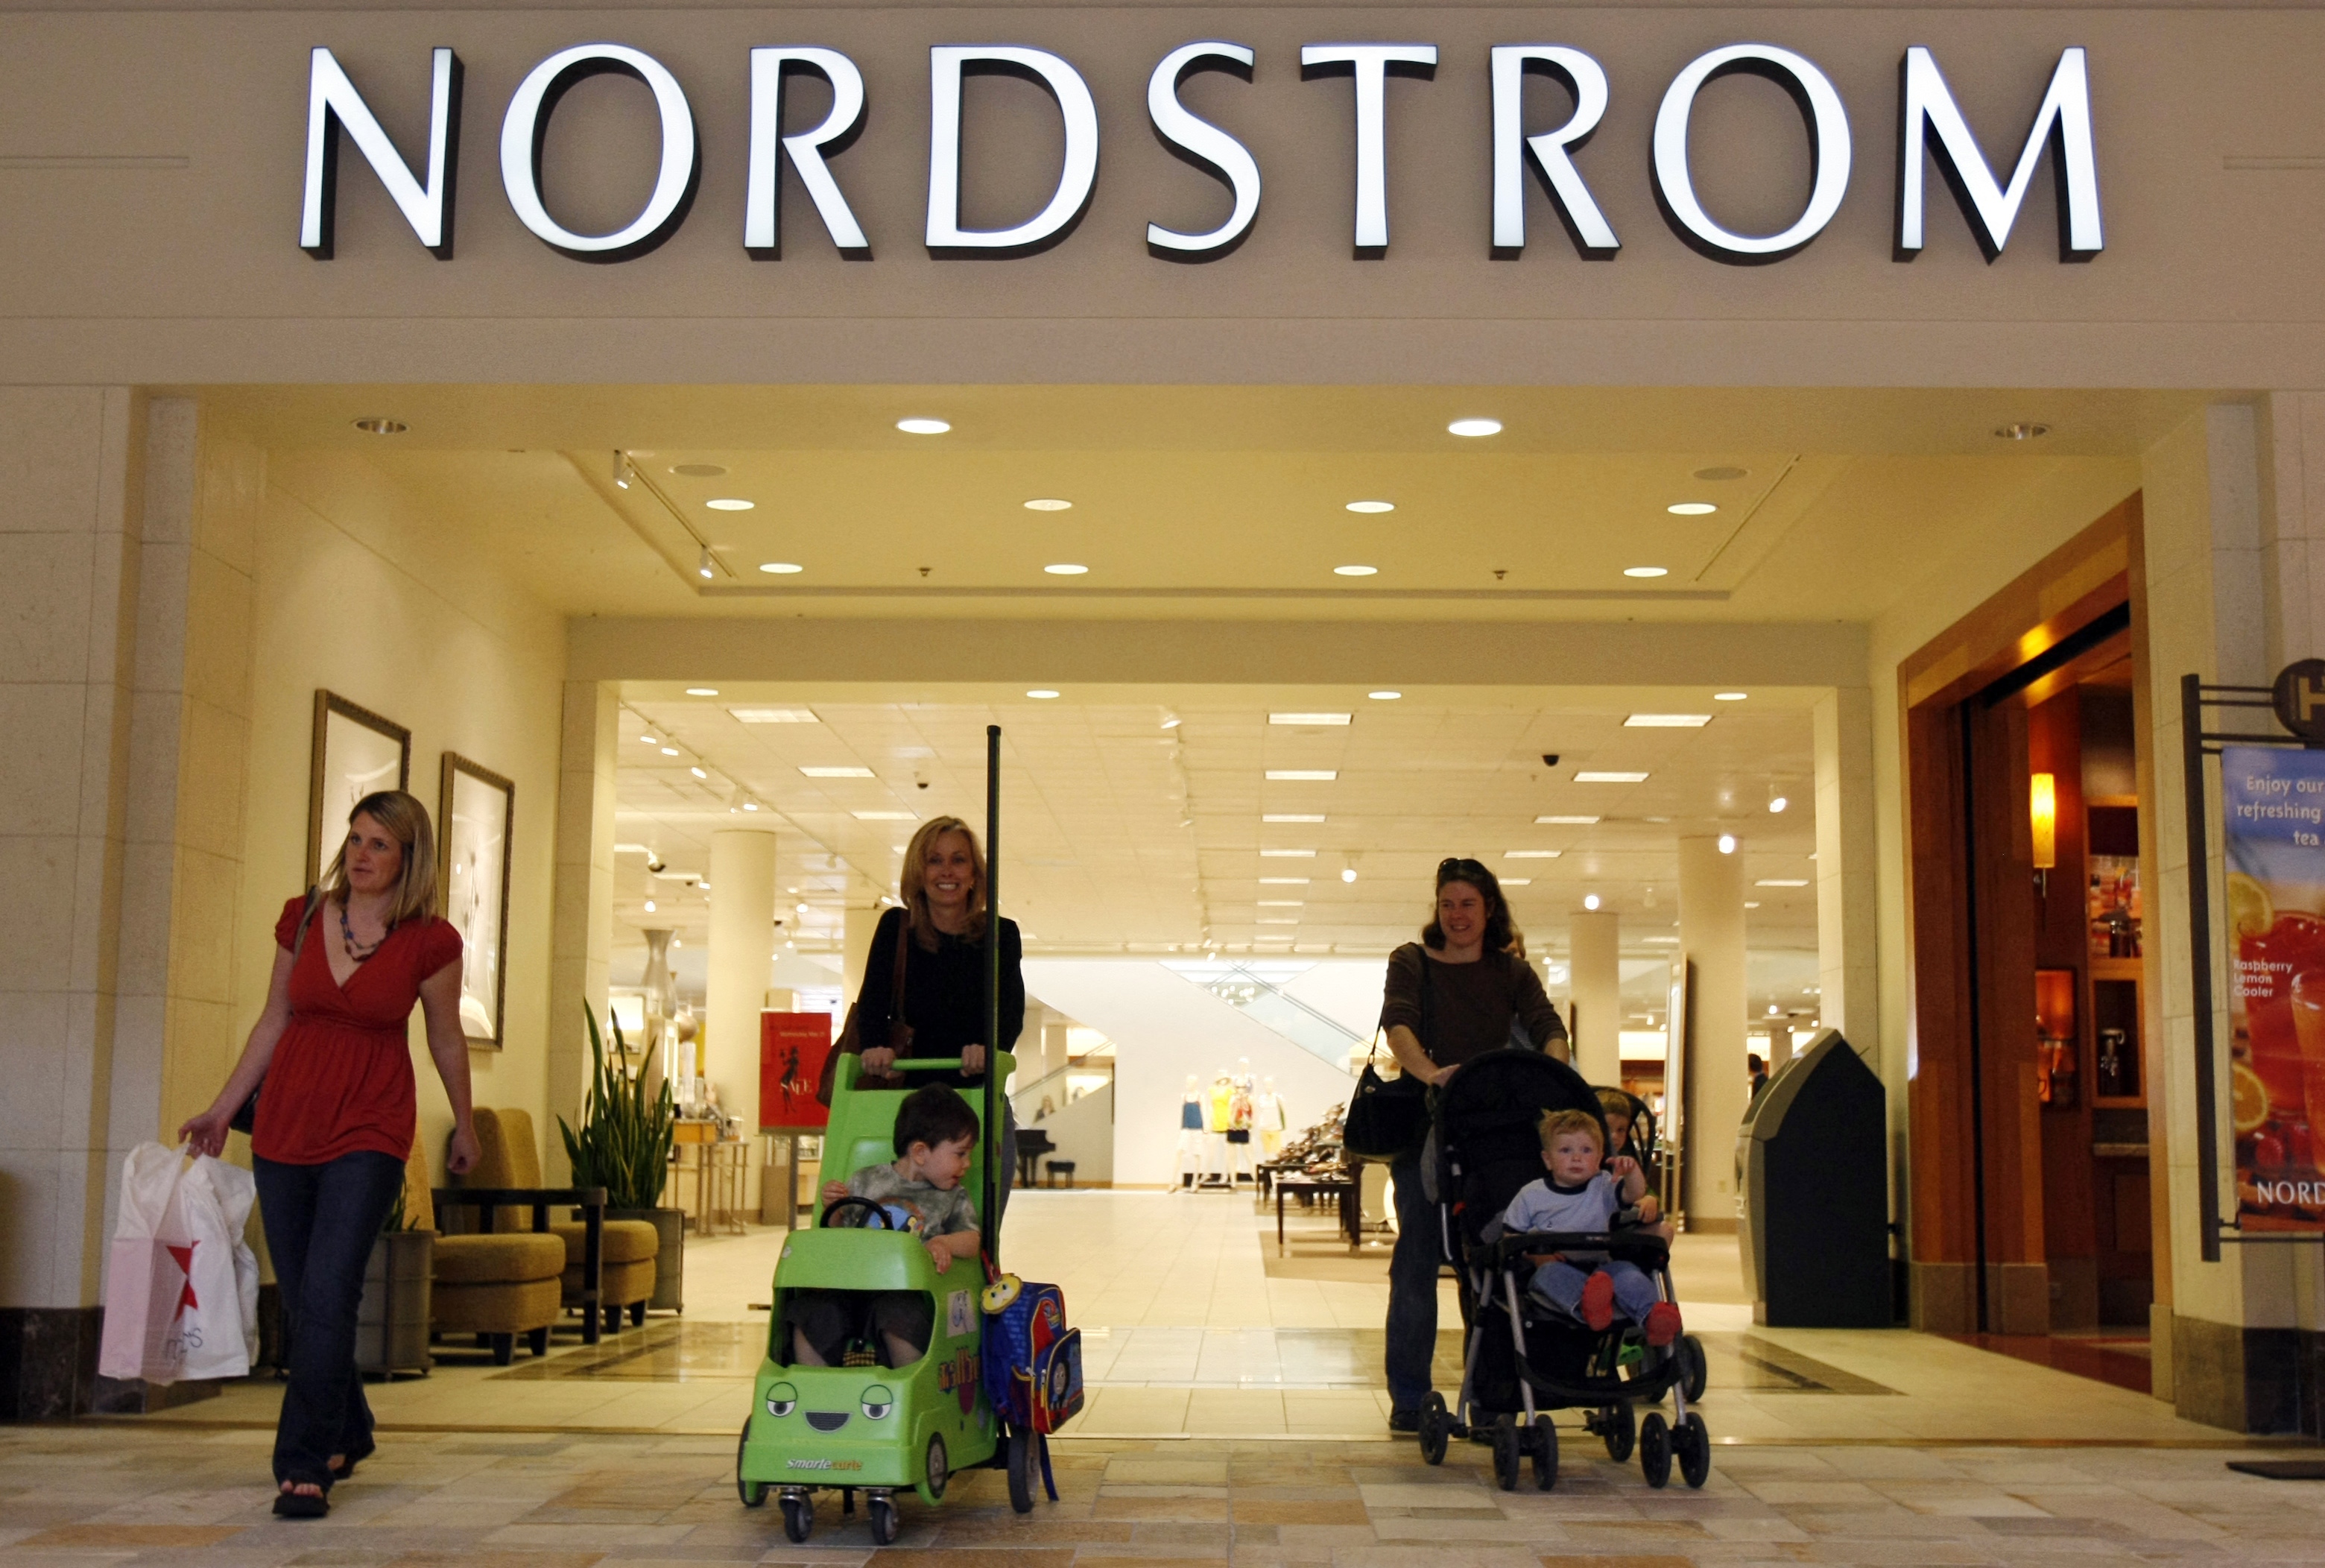 The Nordstrom store at a mall in a Denver suburb